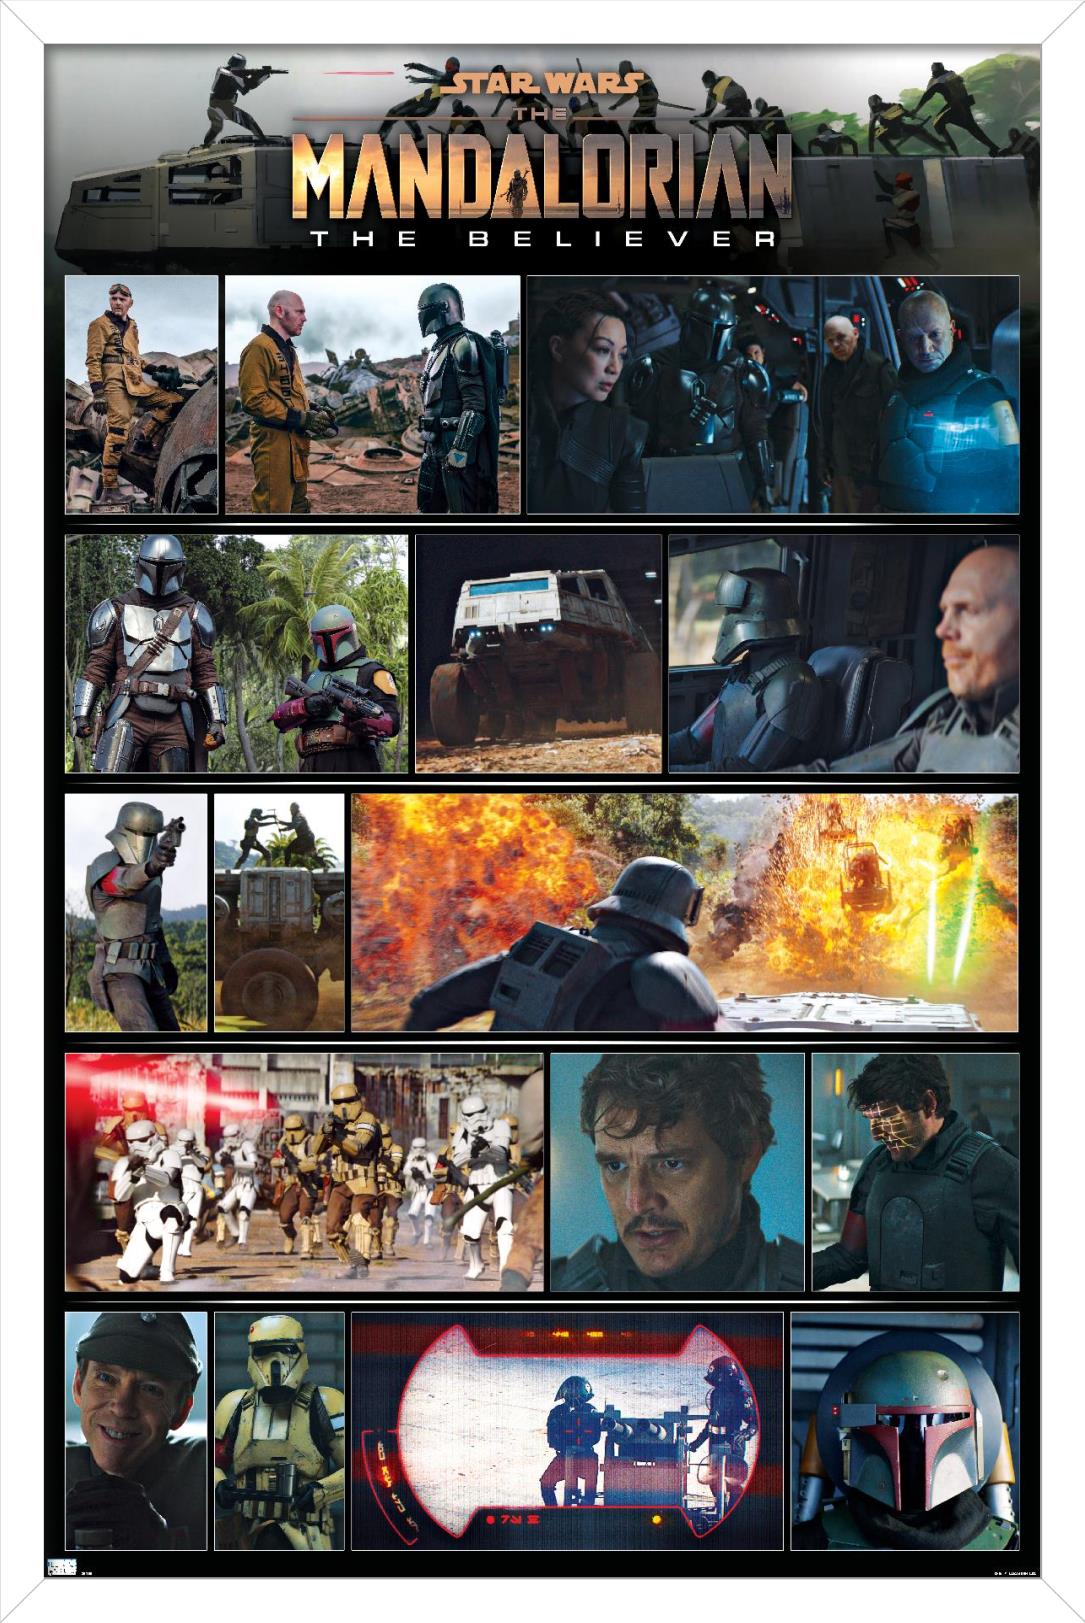 Star Wars: The Mandalorian Season 2 - Chapter 15 Grid Wall Poster, 14.725" x 22.375", Framed - image 1 of 5